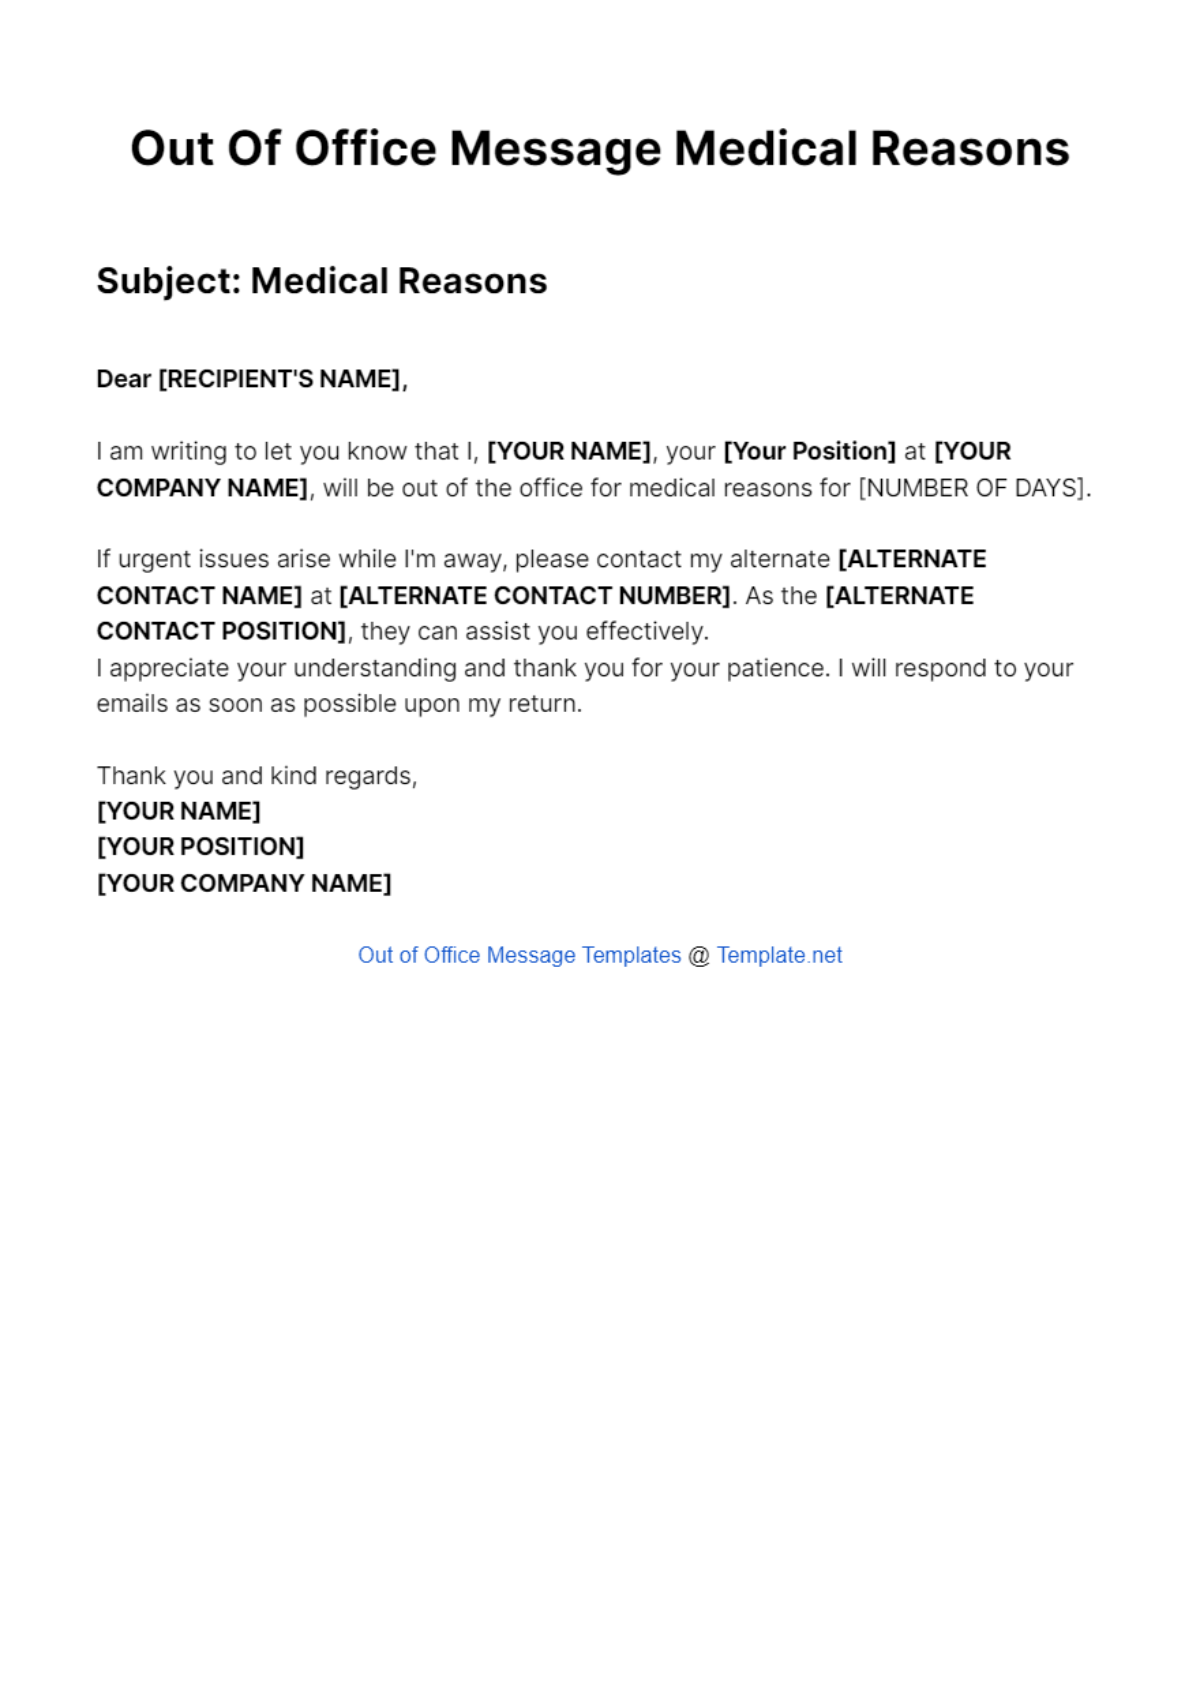 Out Of Office Message Medical Reasons Template